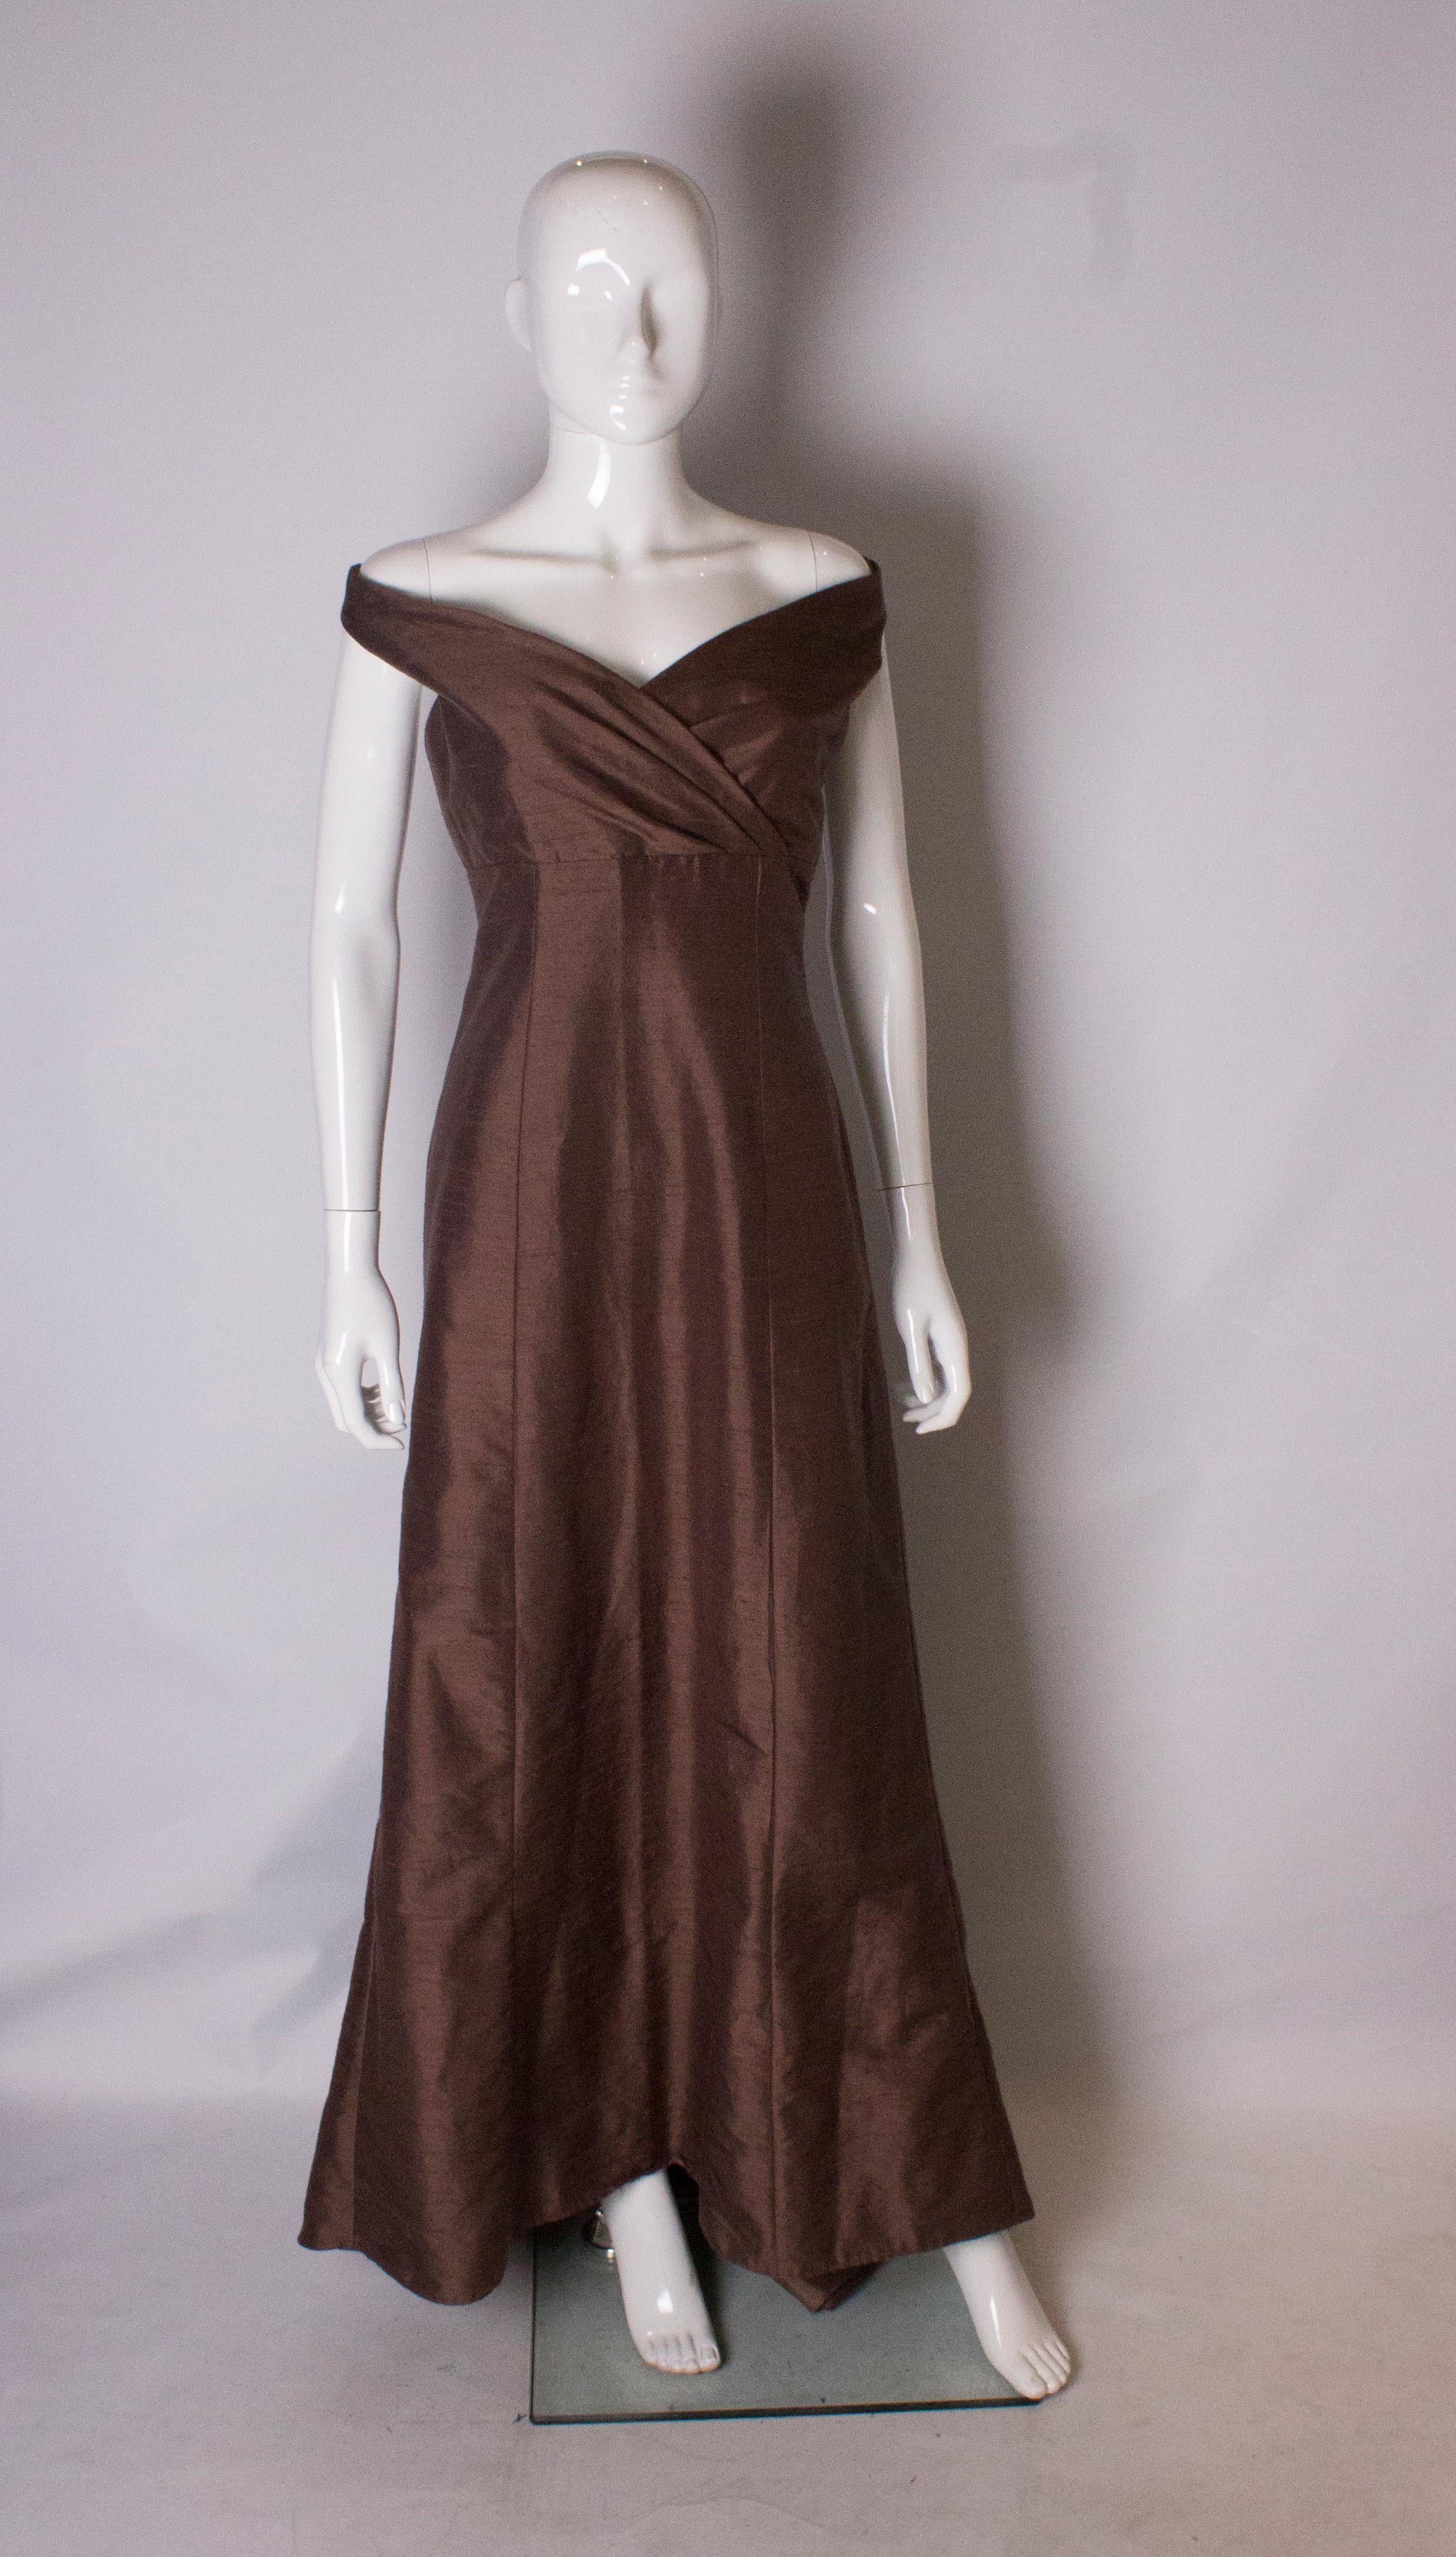 A stunning vintage silk gown in a pretty shade of brown. The dress has a cross over front , and is slightly off the shoulder.
It has a central back zip, is fully lined, and has a puddle train.